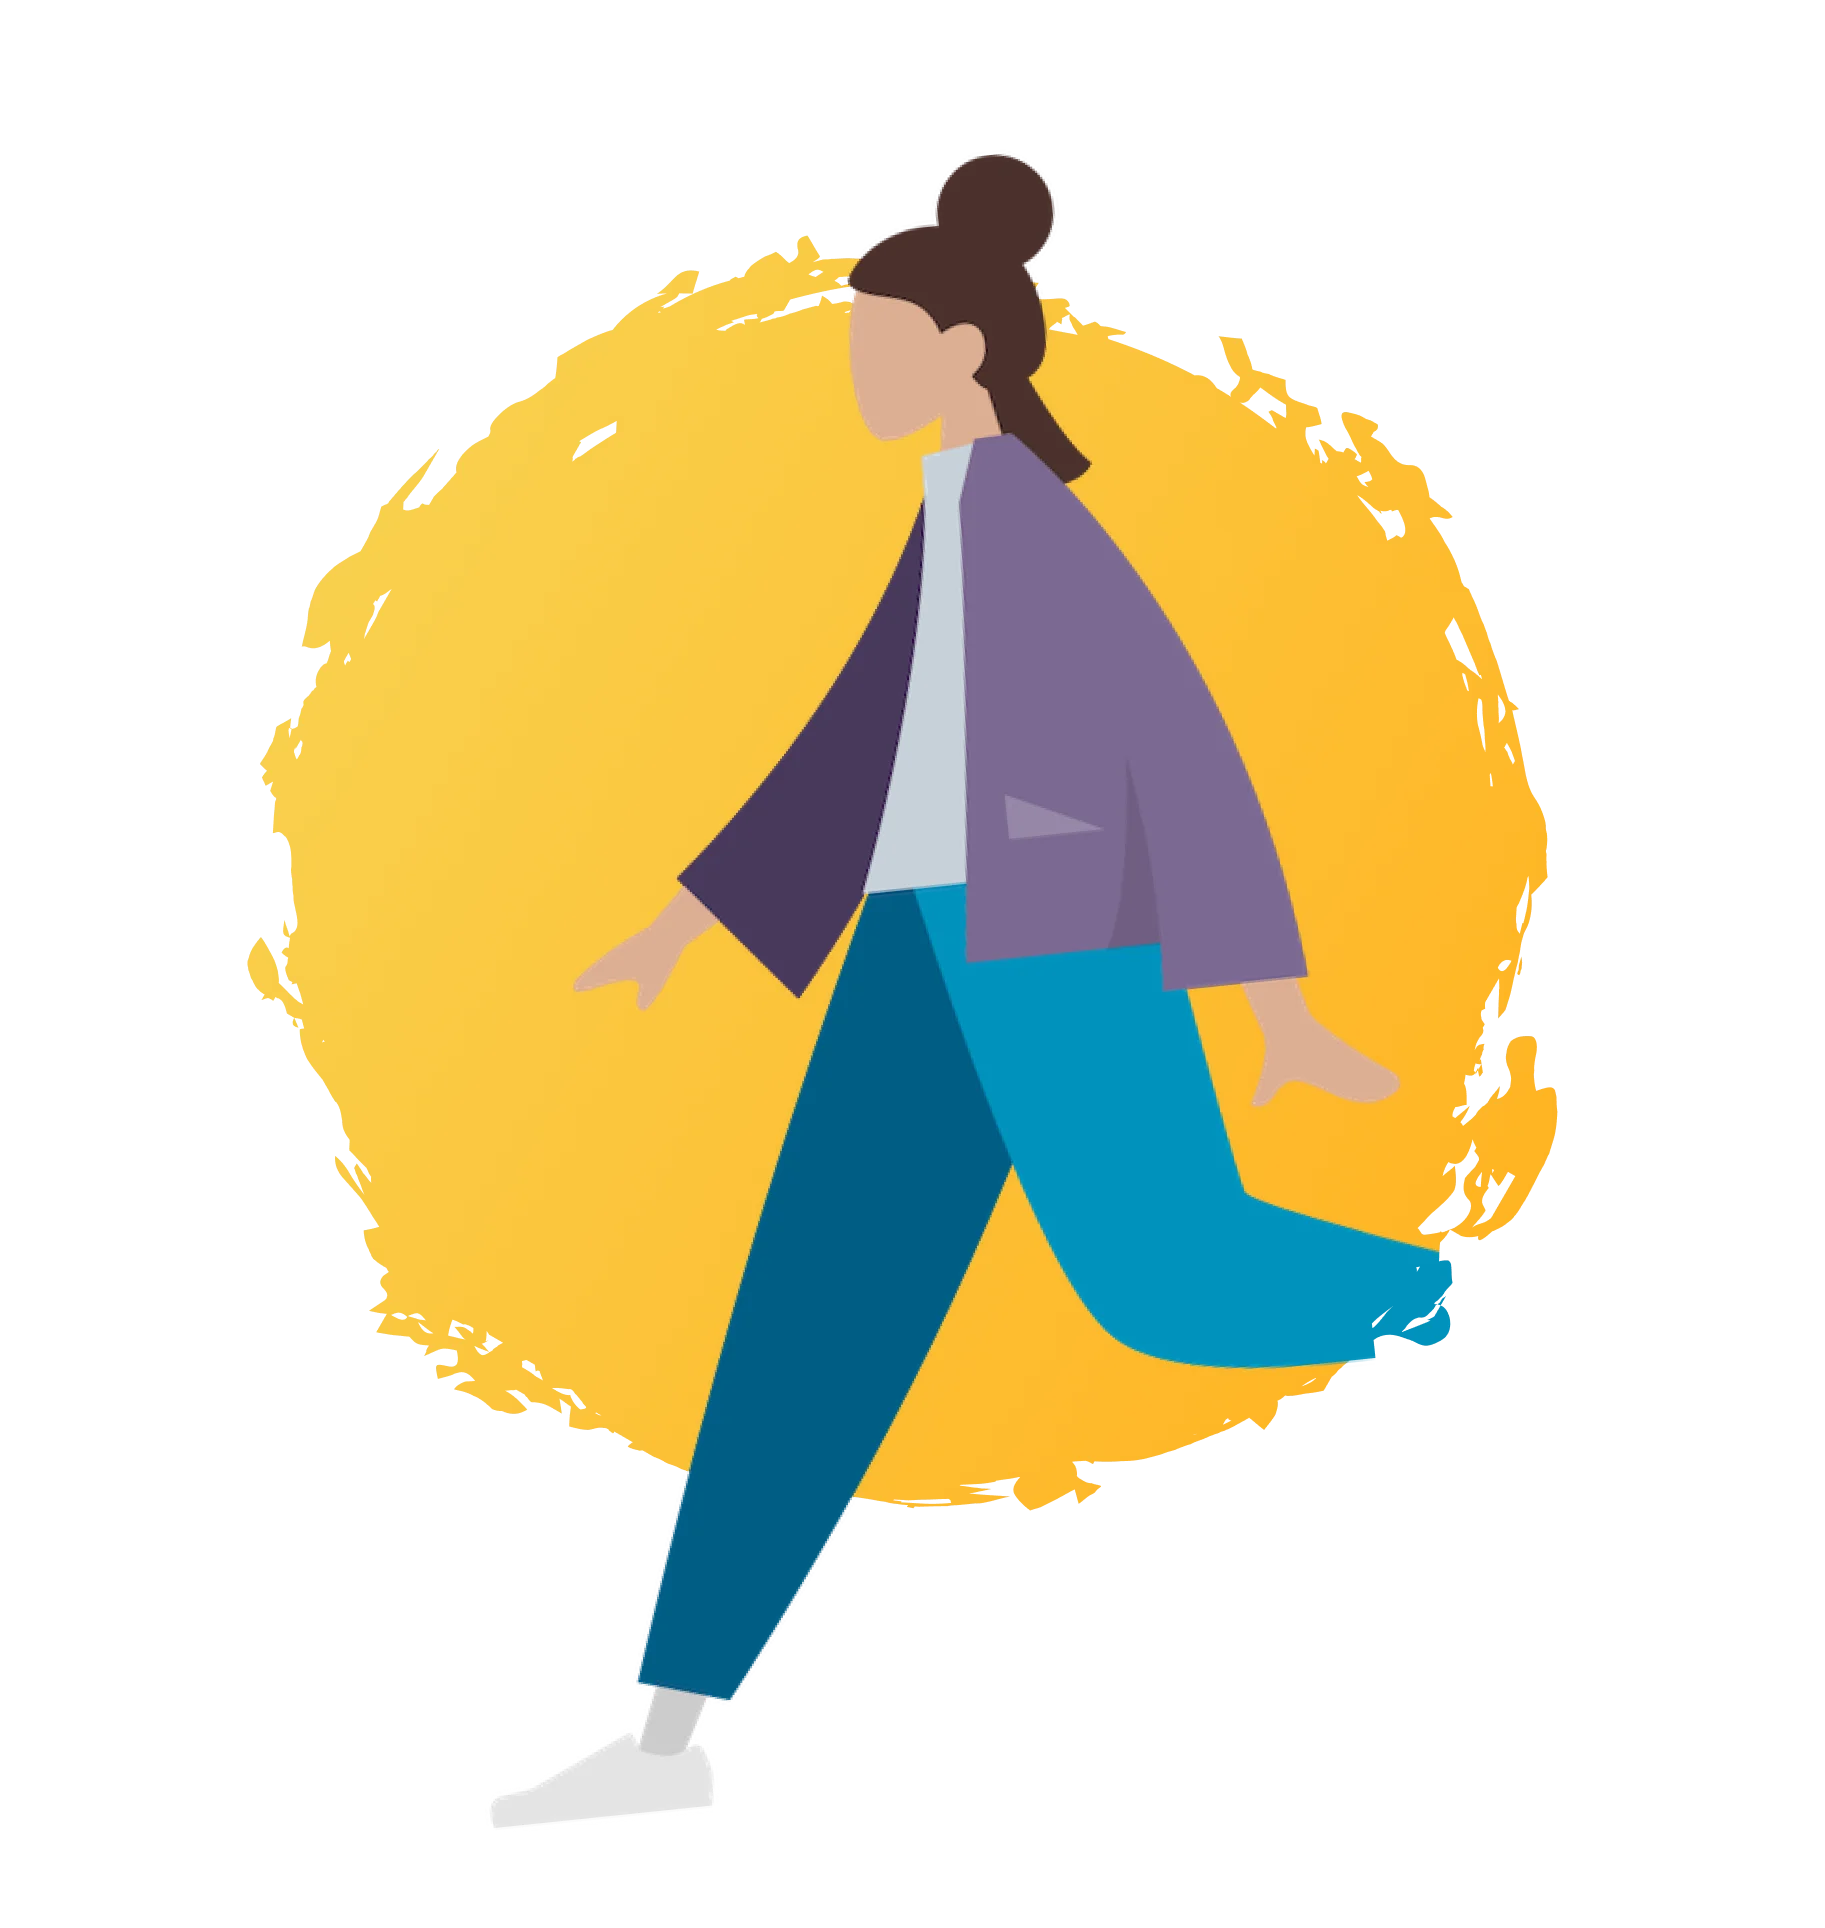 An illustration of a person walking